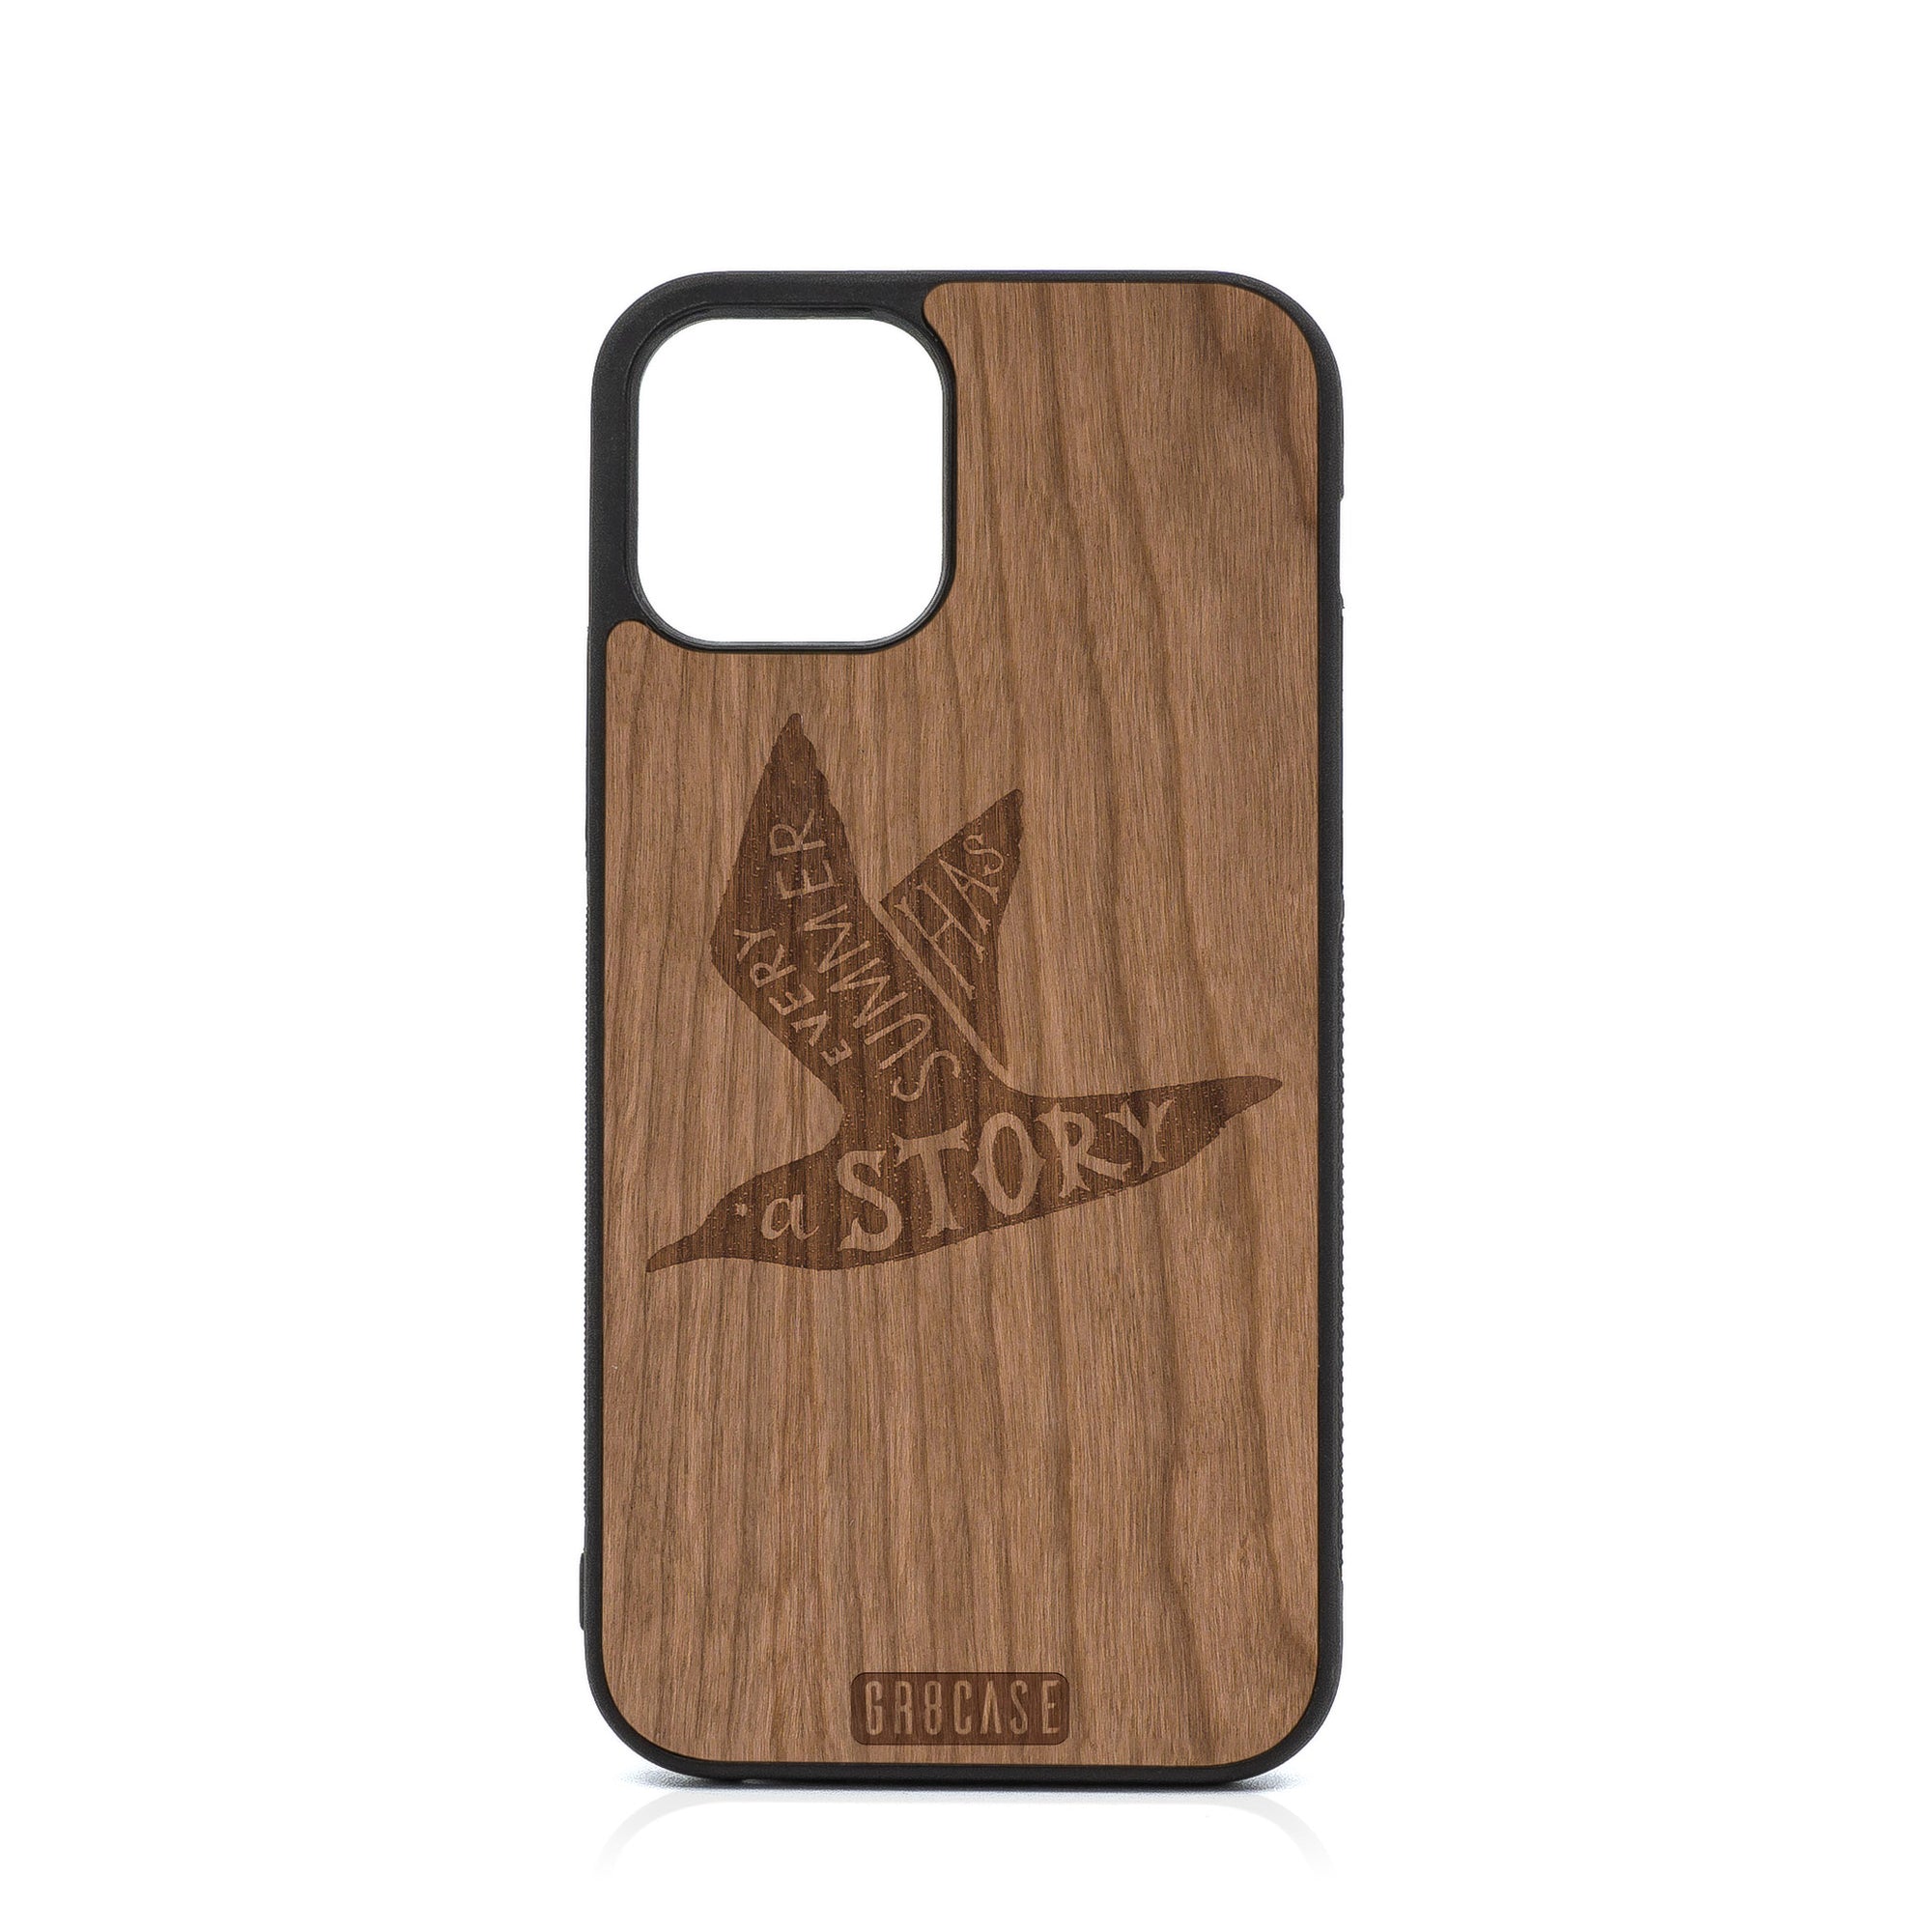 Every Summer Has A Story (Seagull) Design Wood Case For iPhone 12 Pro